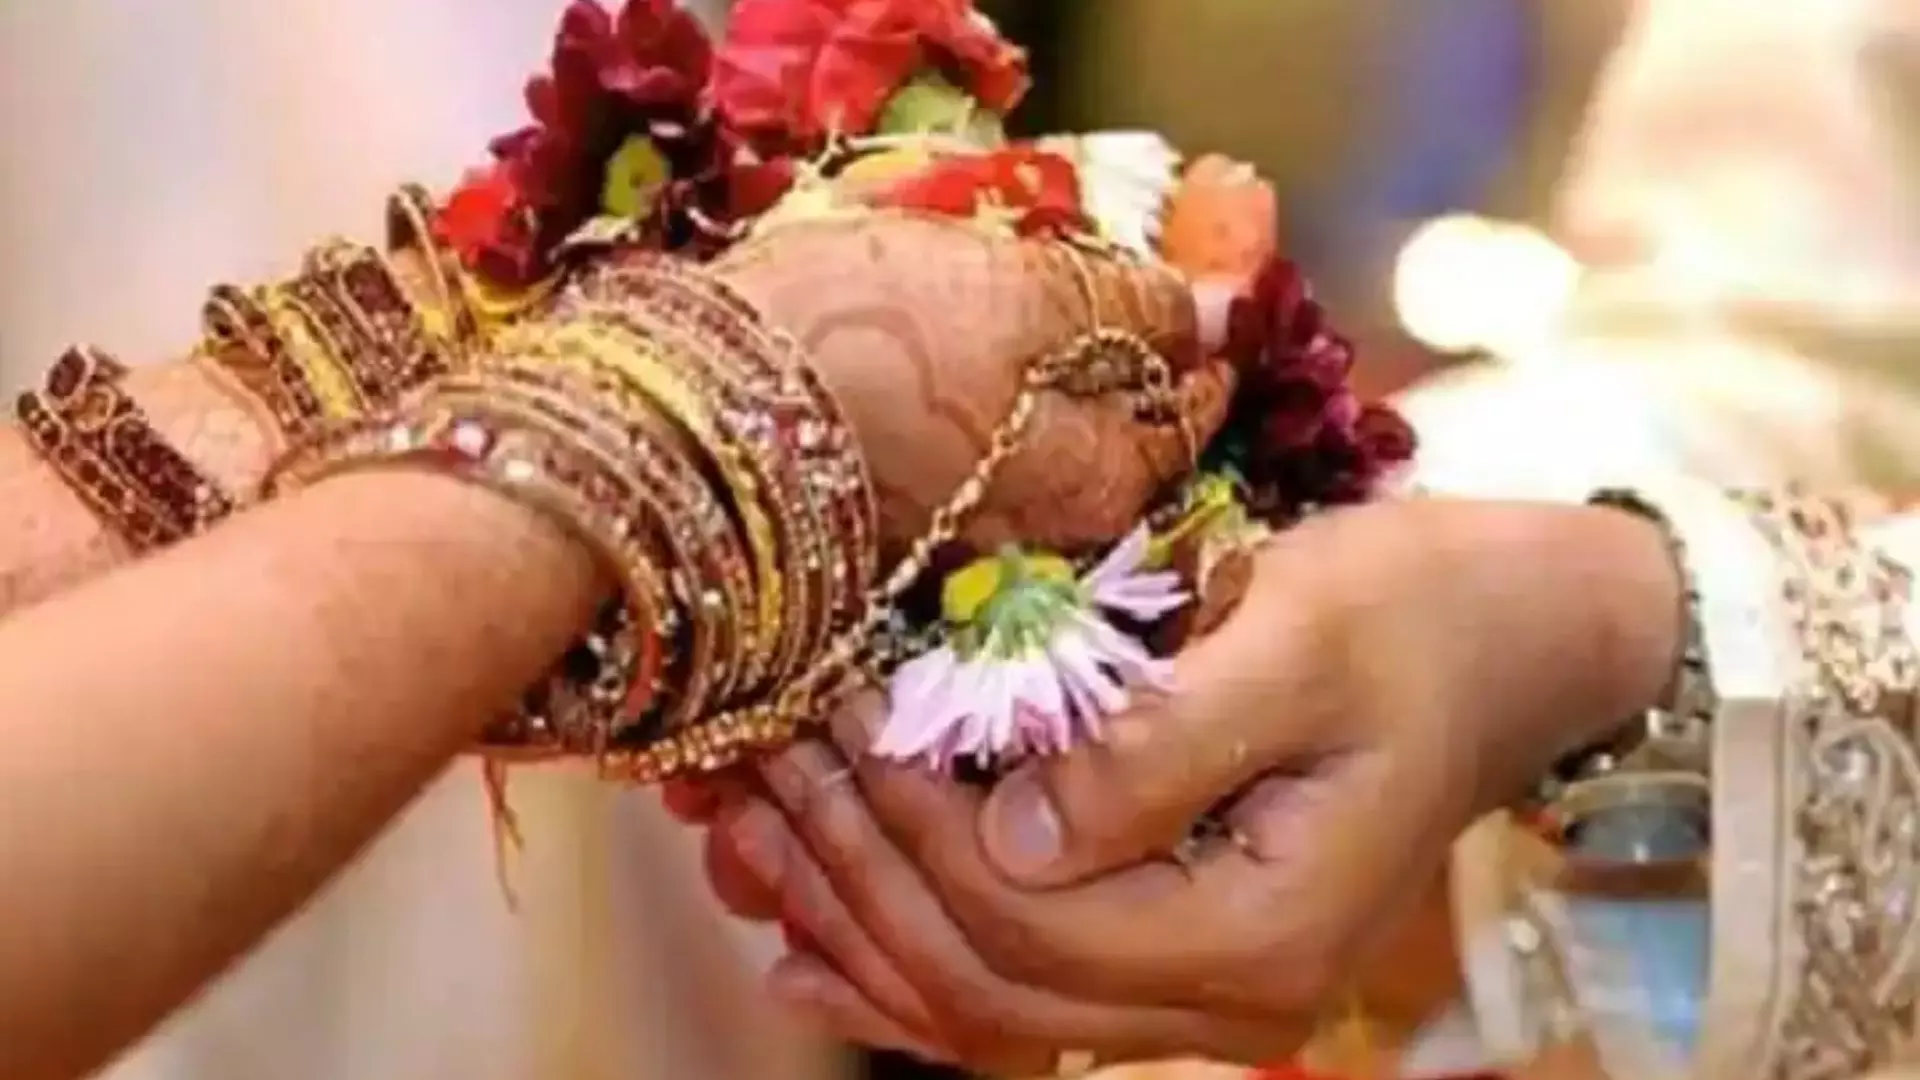 Bride Groom Escapes With Dowry Money in Malkapur Sangareddy District